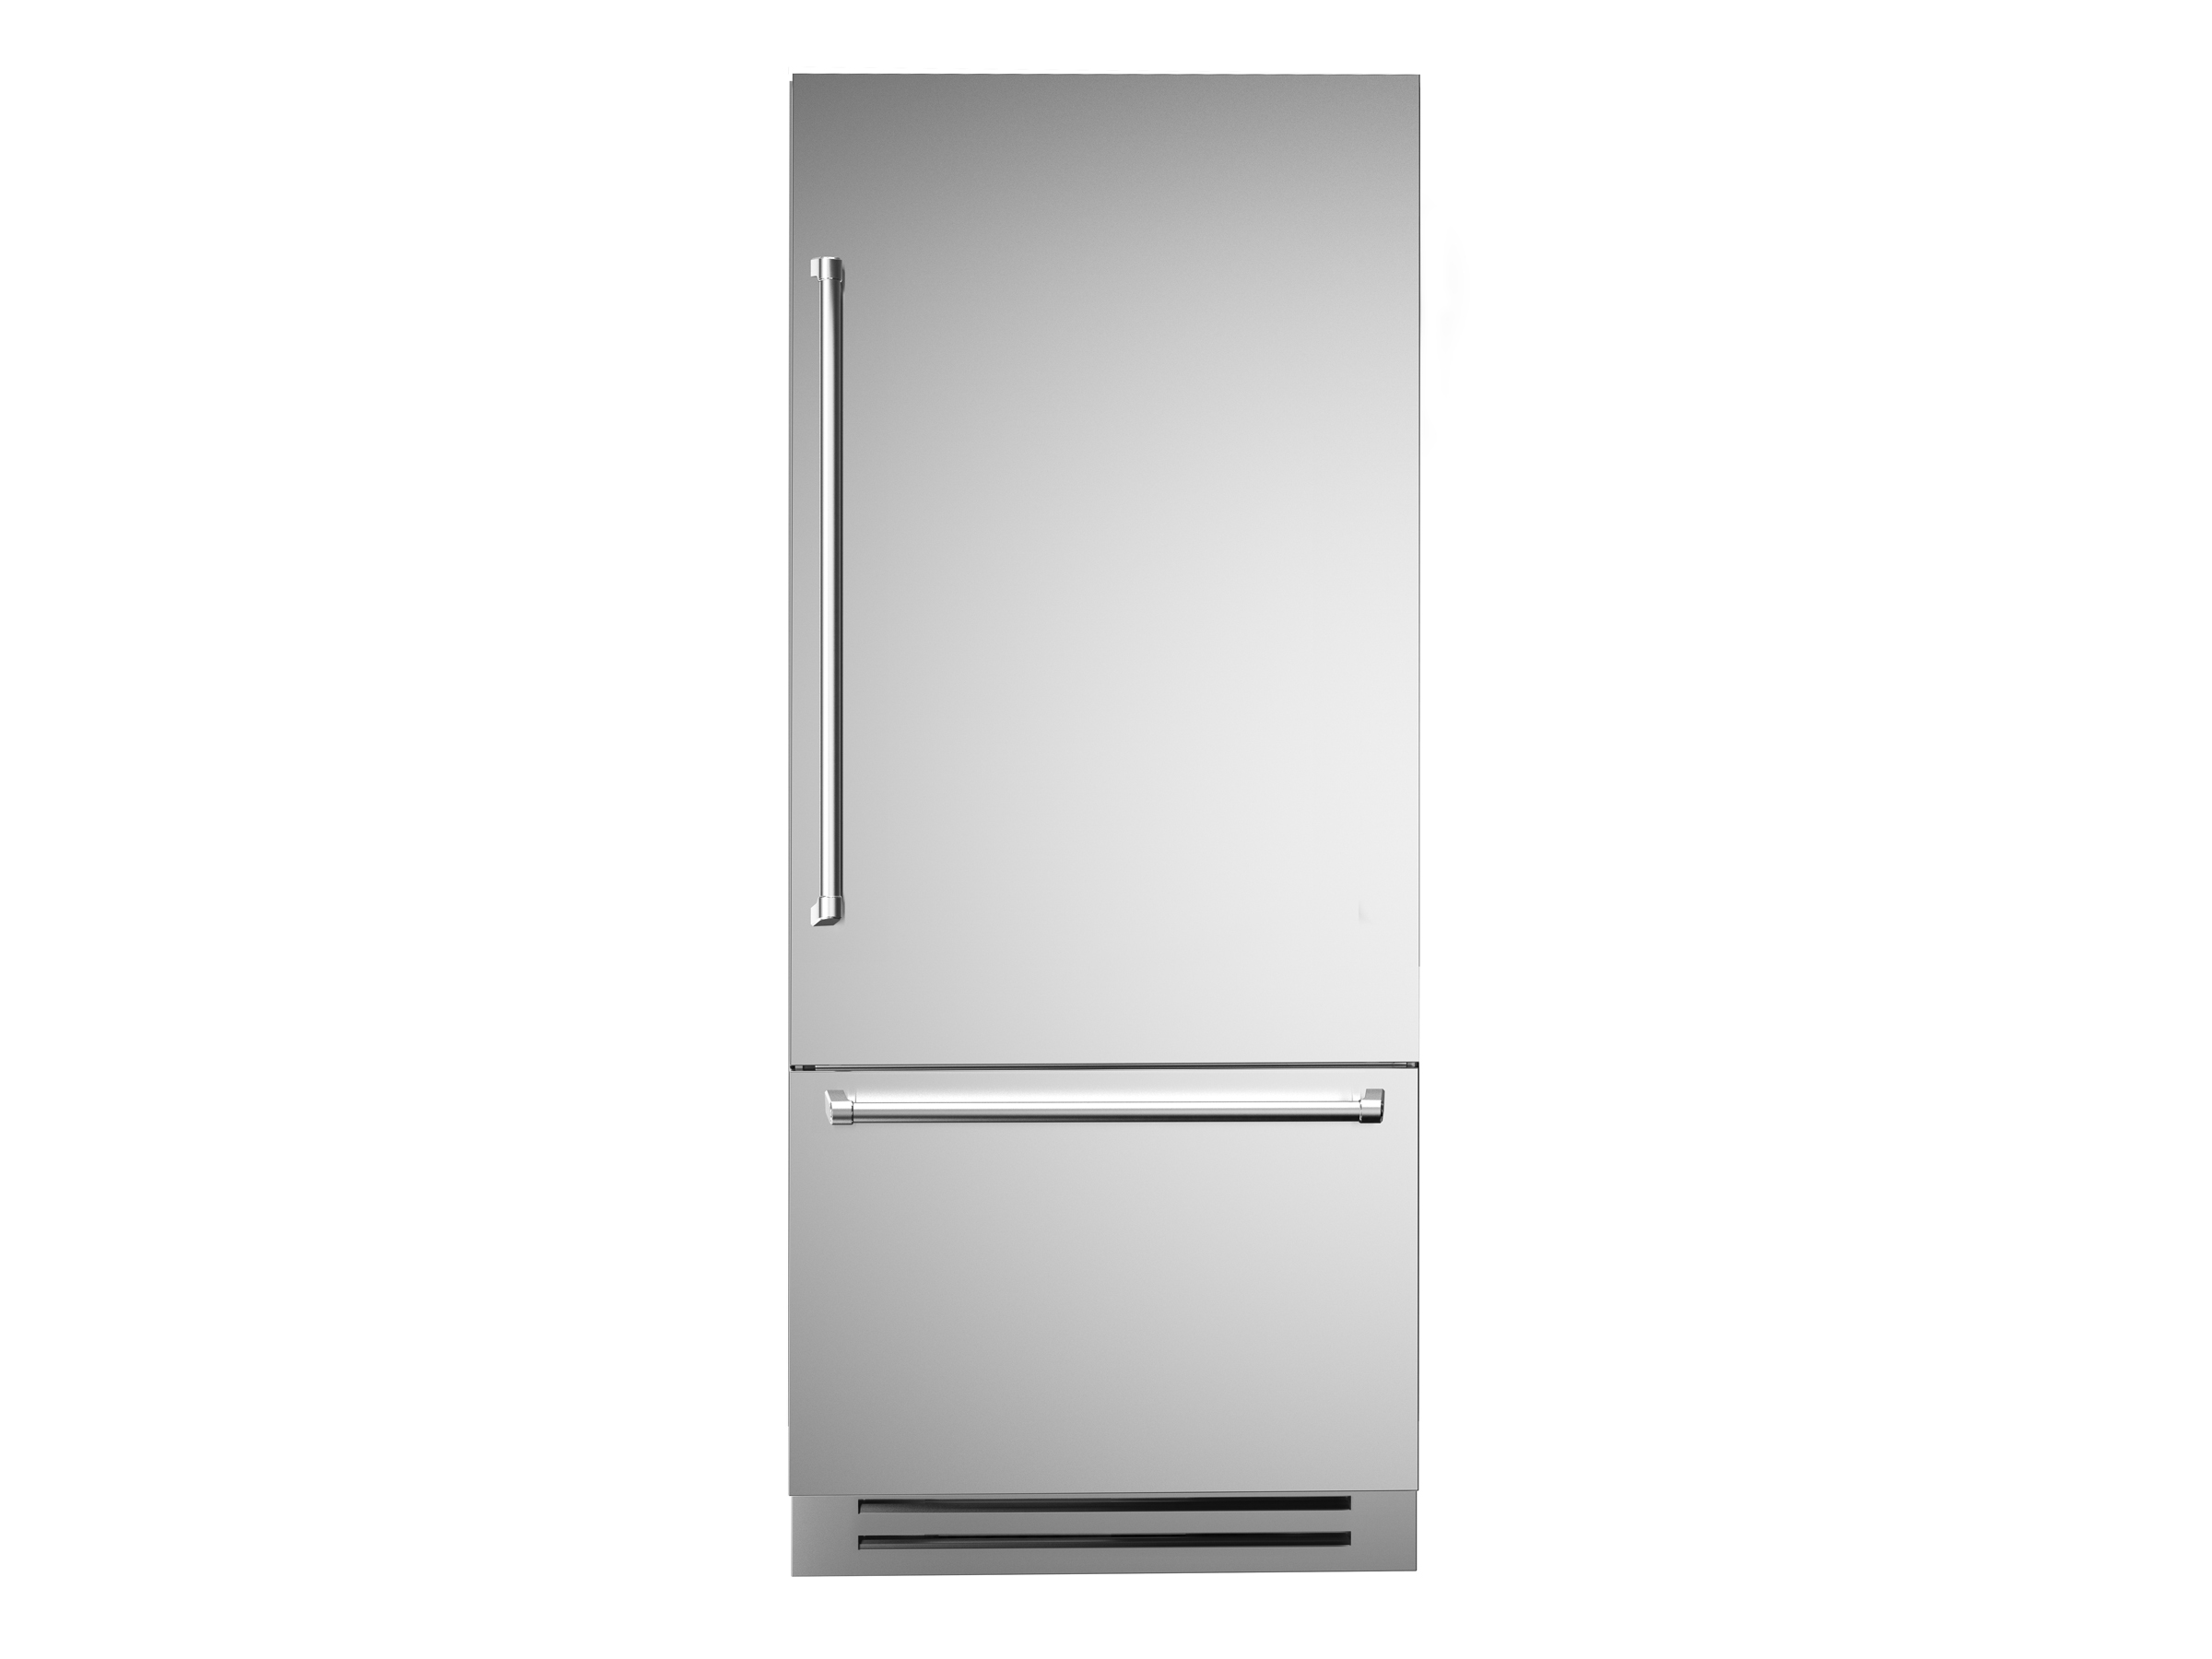 Hallman 36 Built-in, Single Top Door Refrigerator with Internal Filtered Water Dispenser and Bottom Freezer with Automatic Icemaker (TOTAL 19.8 Cu.